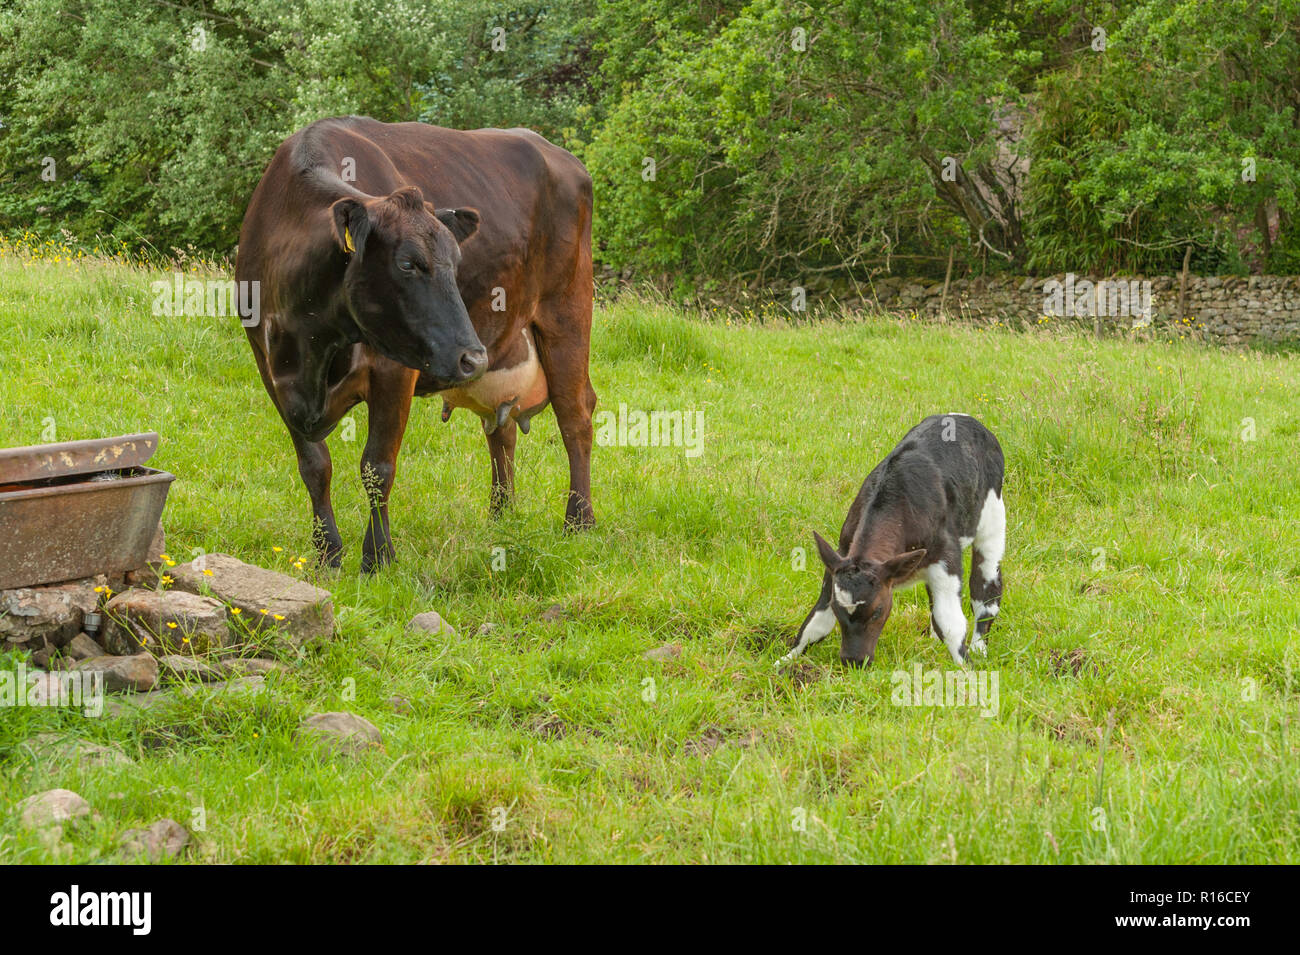 Mother cow watching adorable newborn calf standing up for the first time Stock Photo